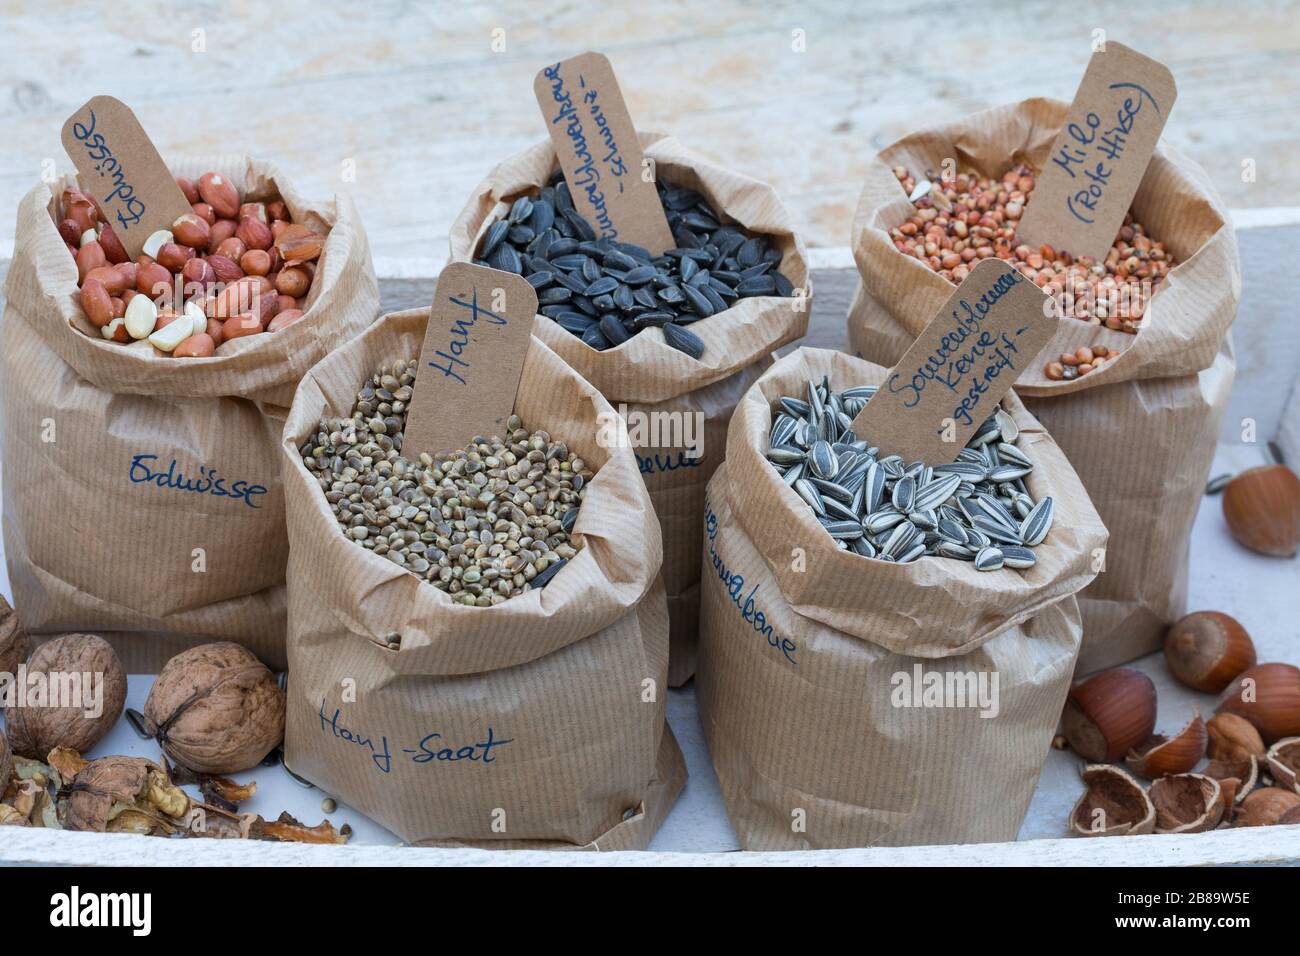 ingredients for mixed birdseeds: peanuts, great millet, sunflower seeds, walnuts and Hazelnuts, Germany Stock Photo